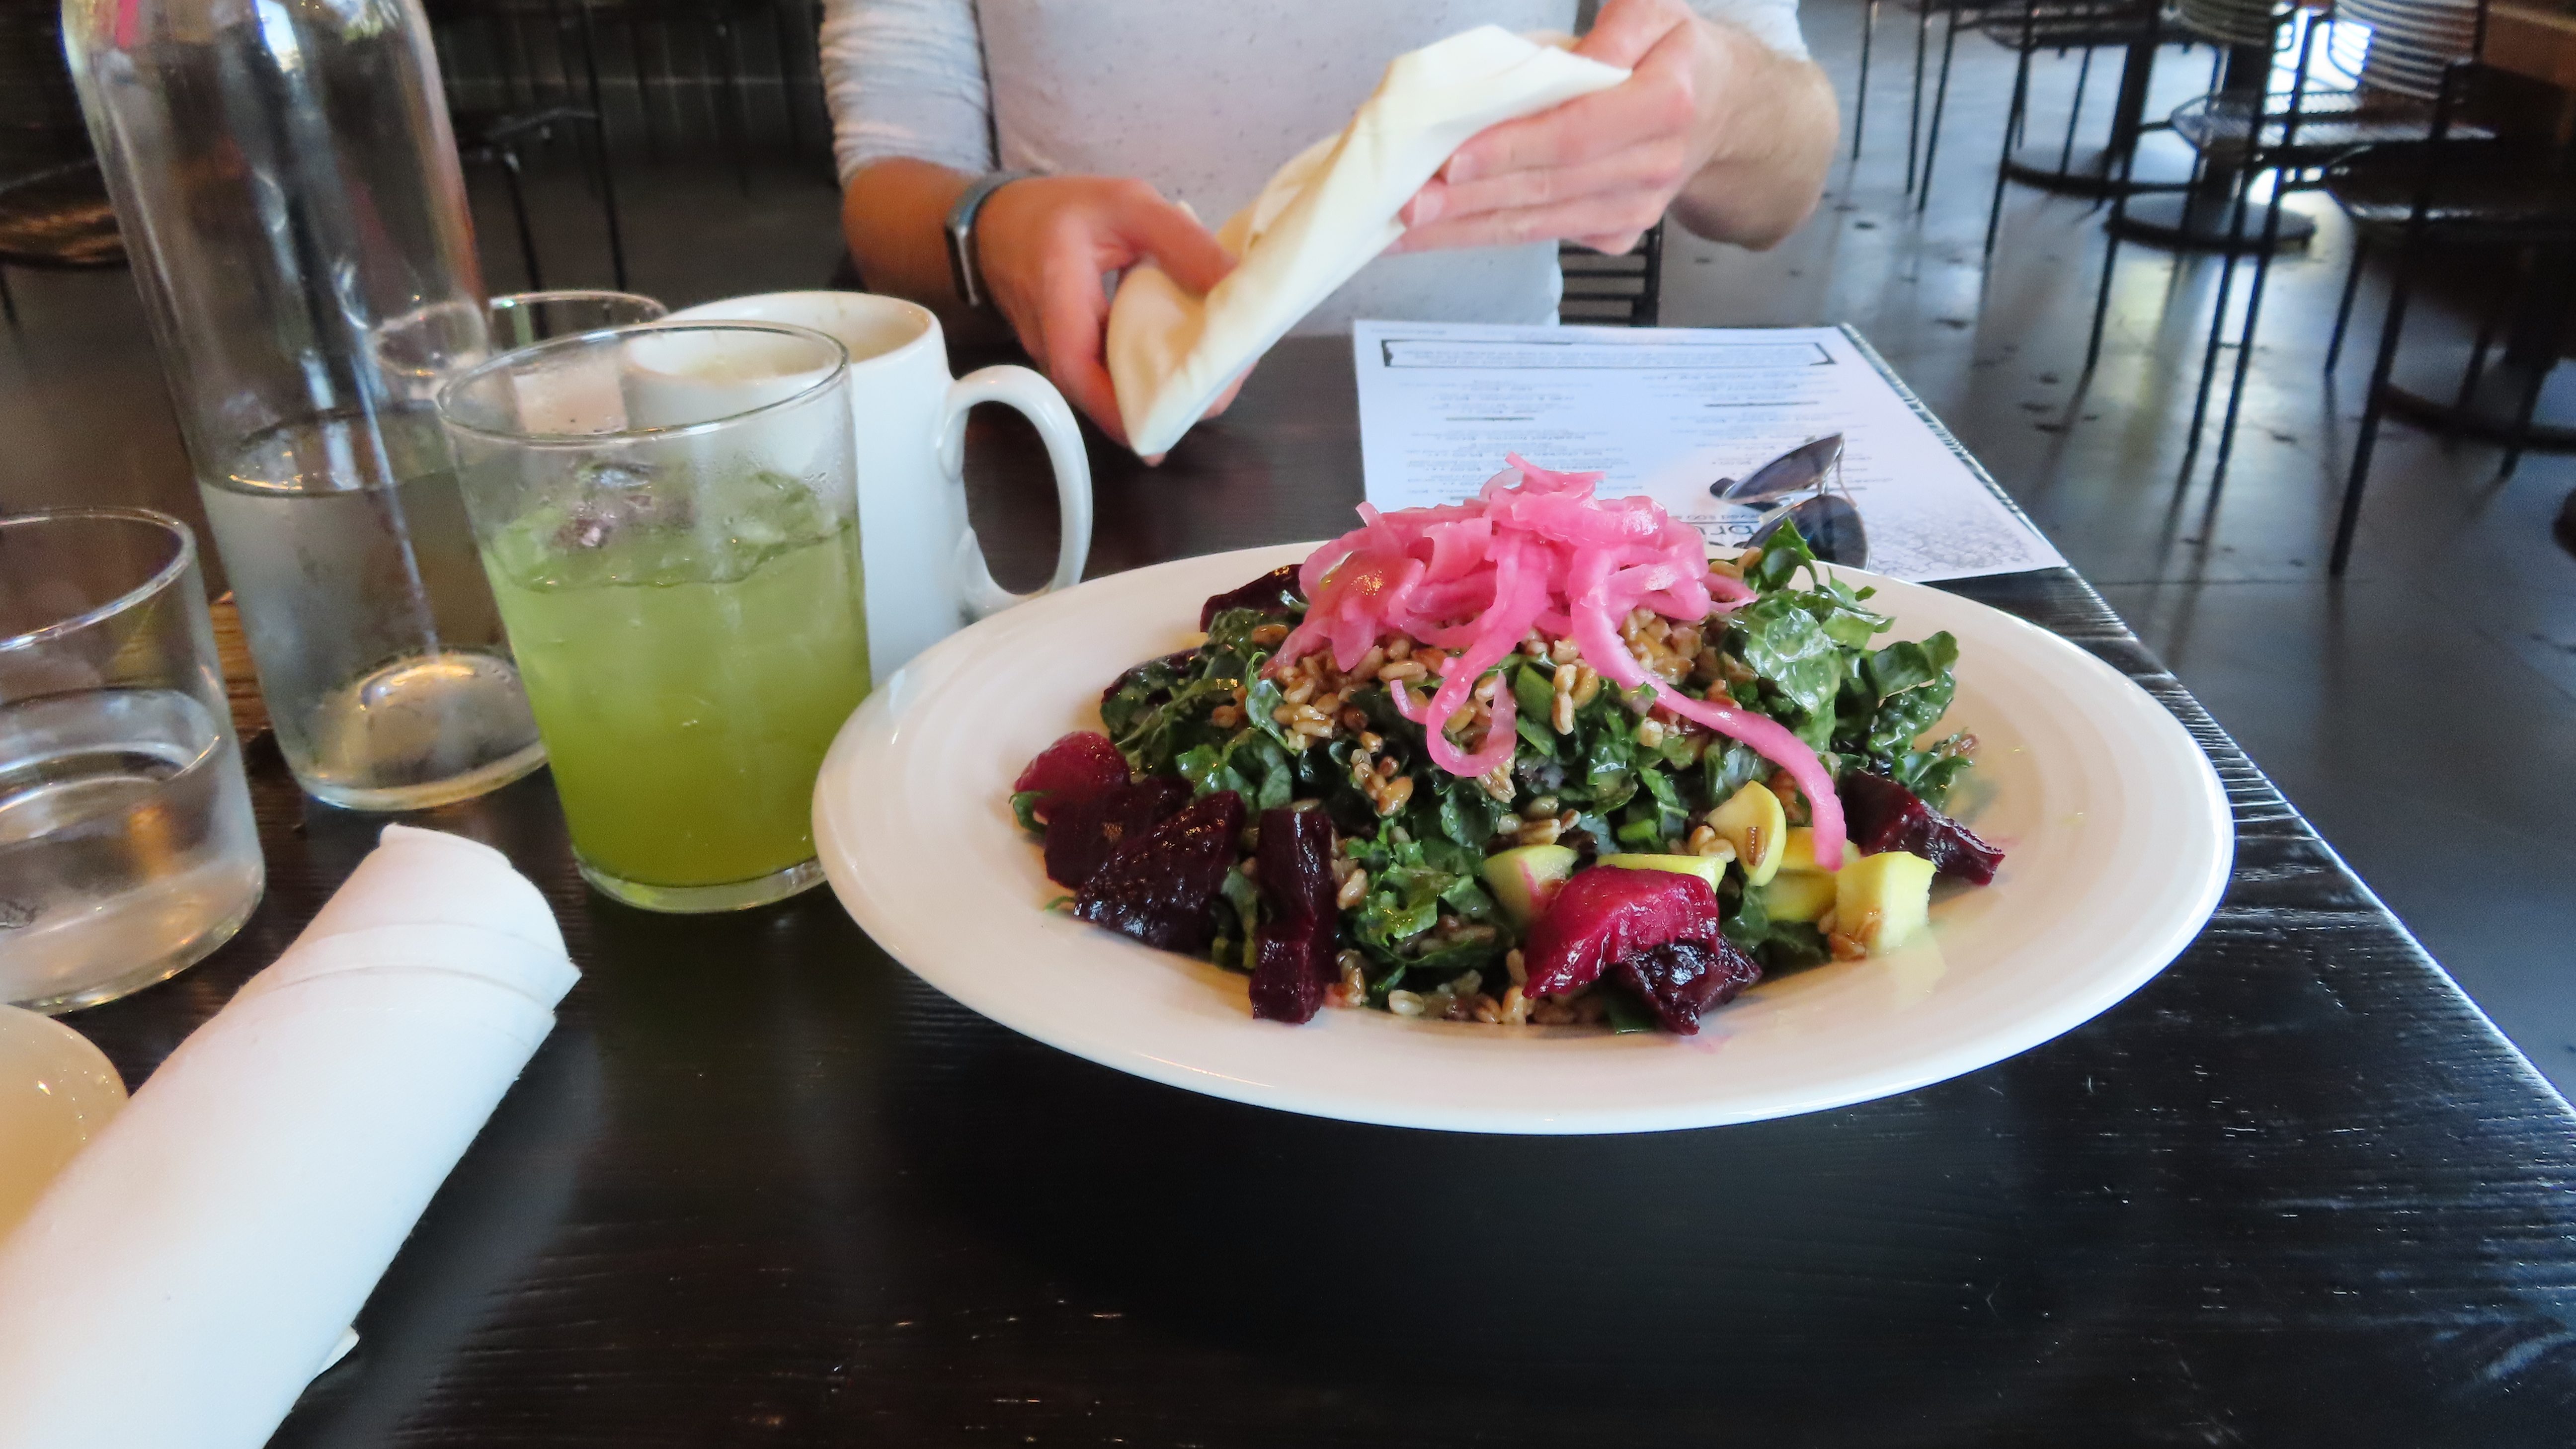 A kale salad with farro, pickled red onion, apples and cara cara rice dressing. The colors of yellow from the apple, red from the pickled onion and green kale looks bright and beautiful. There is my coffee mug and Jennifer's green drink on the right.